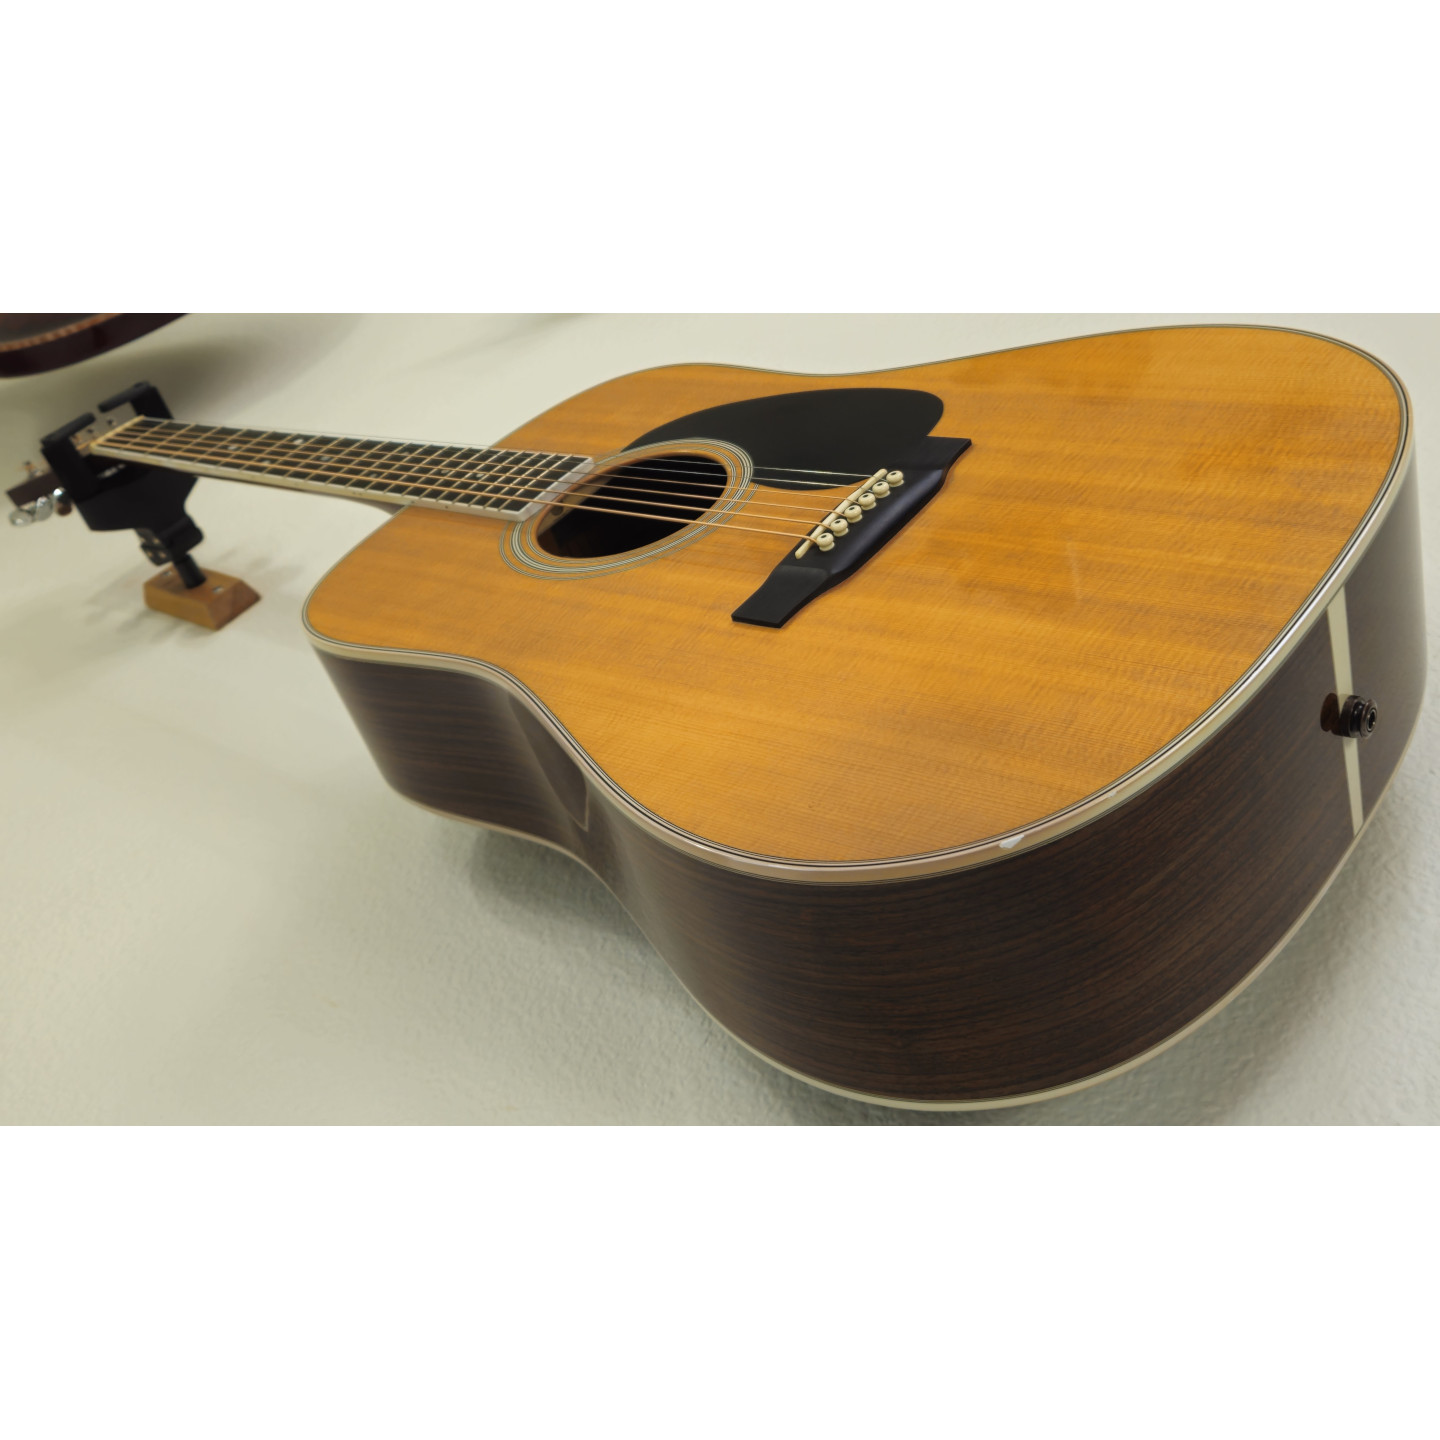 2015 Martin D-35 50th Anniversary Natural Acoustic-Electric Guitar